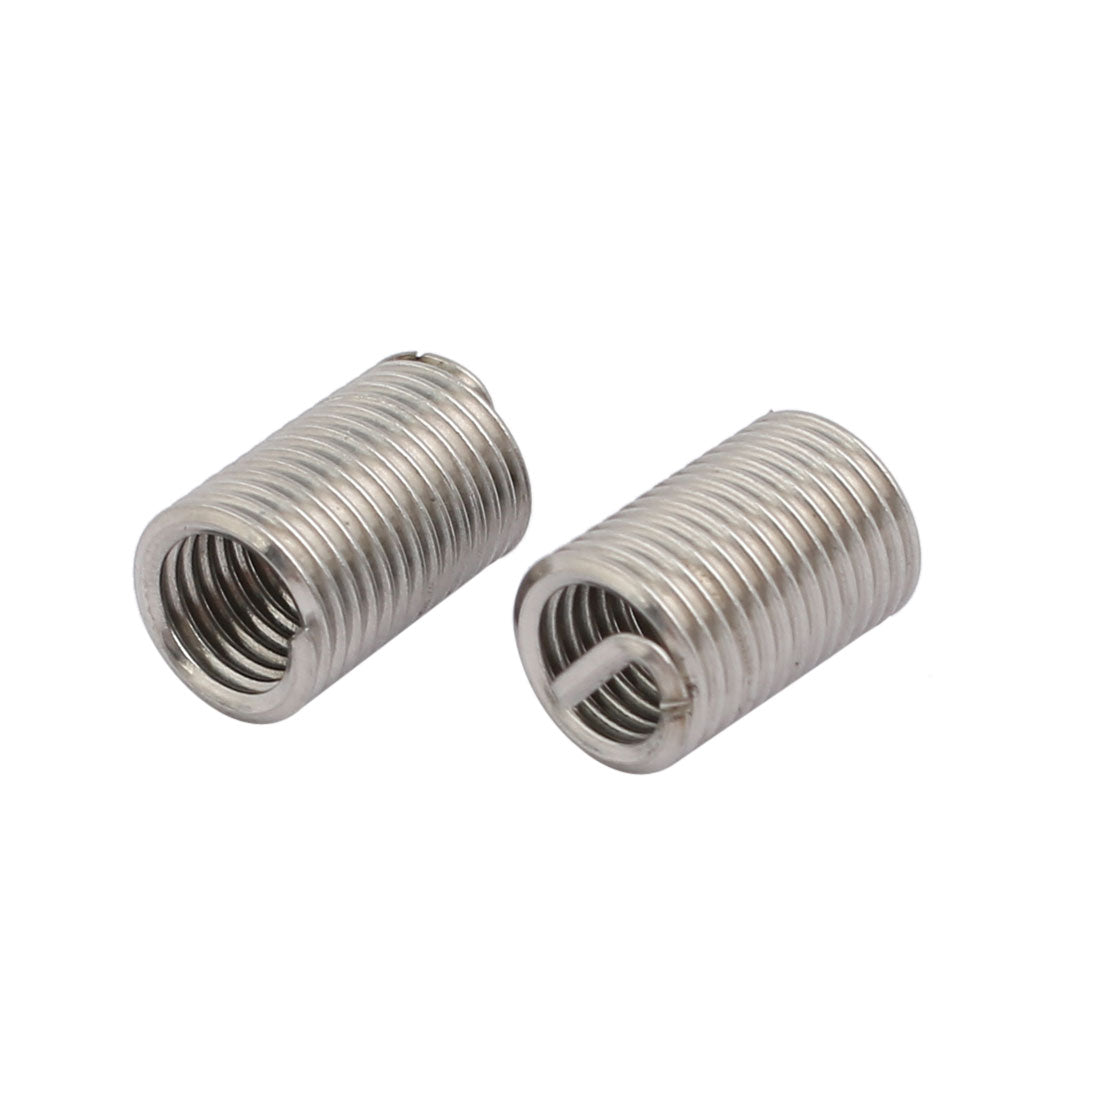 uxcell Uxcell M6x1mmx18mm 304 Stainless Steel Helical Coil Wire Thread Insert 12pcs